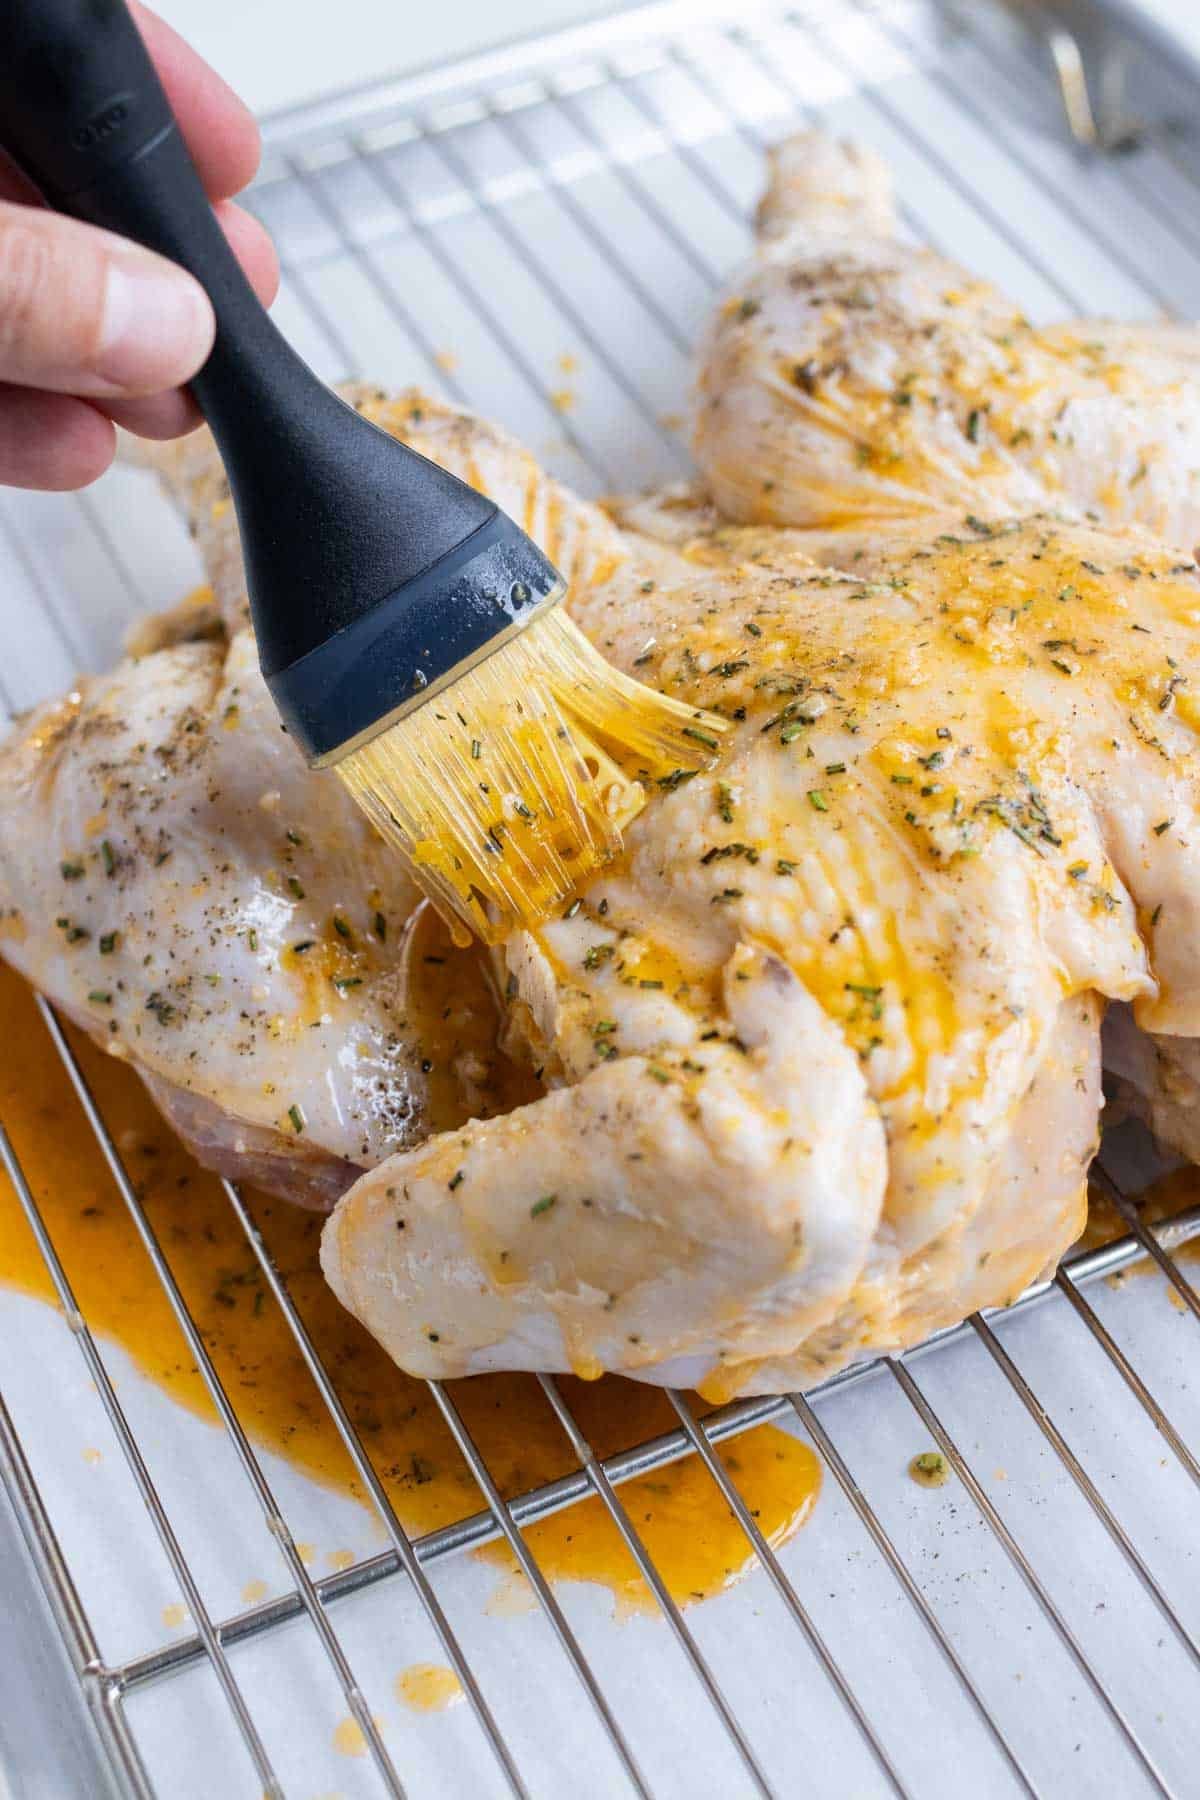 Melted, seasoned butter is brushed on the skin of a chicken.